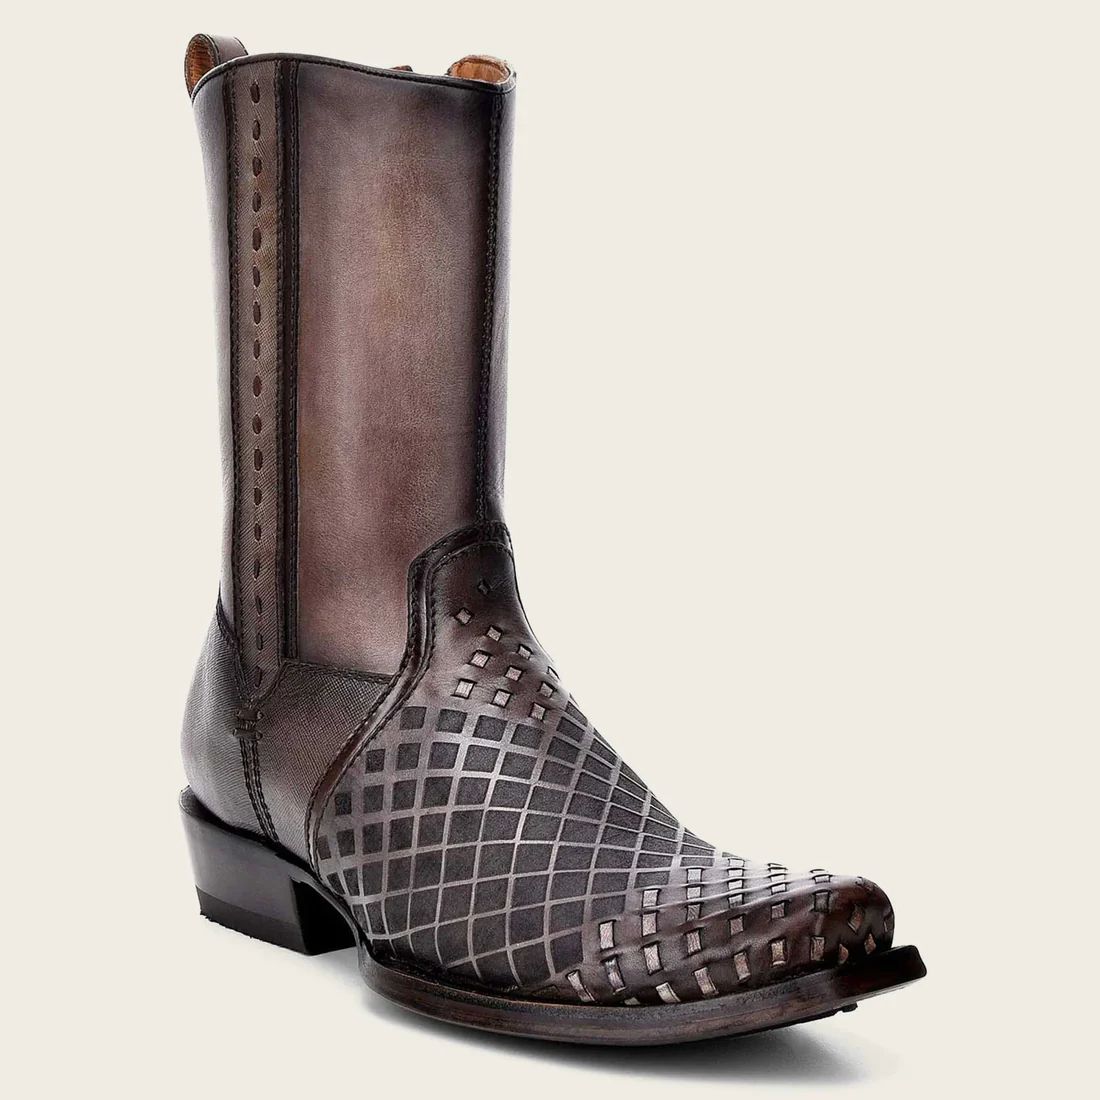 Cuadra | Engraved Oxford Leather Boot